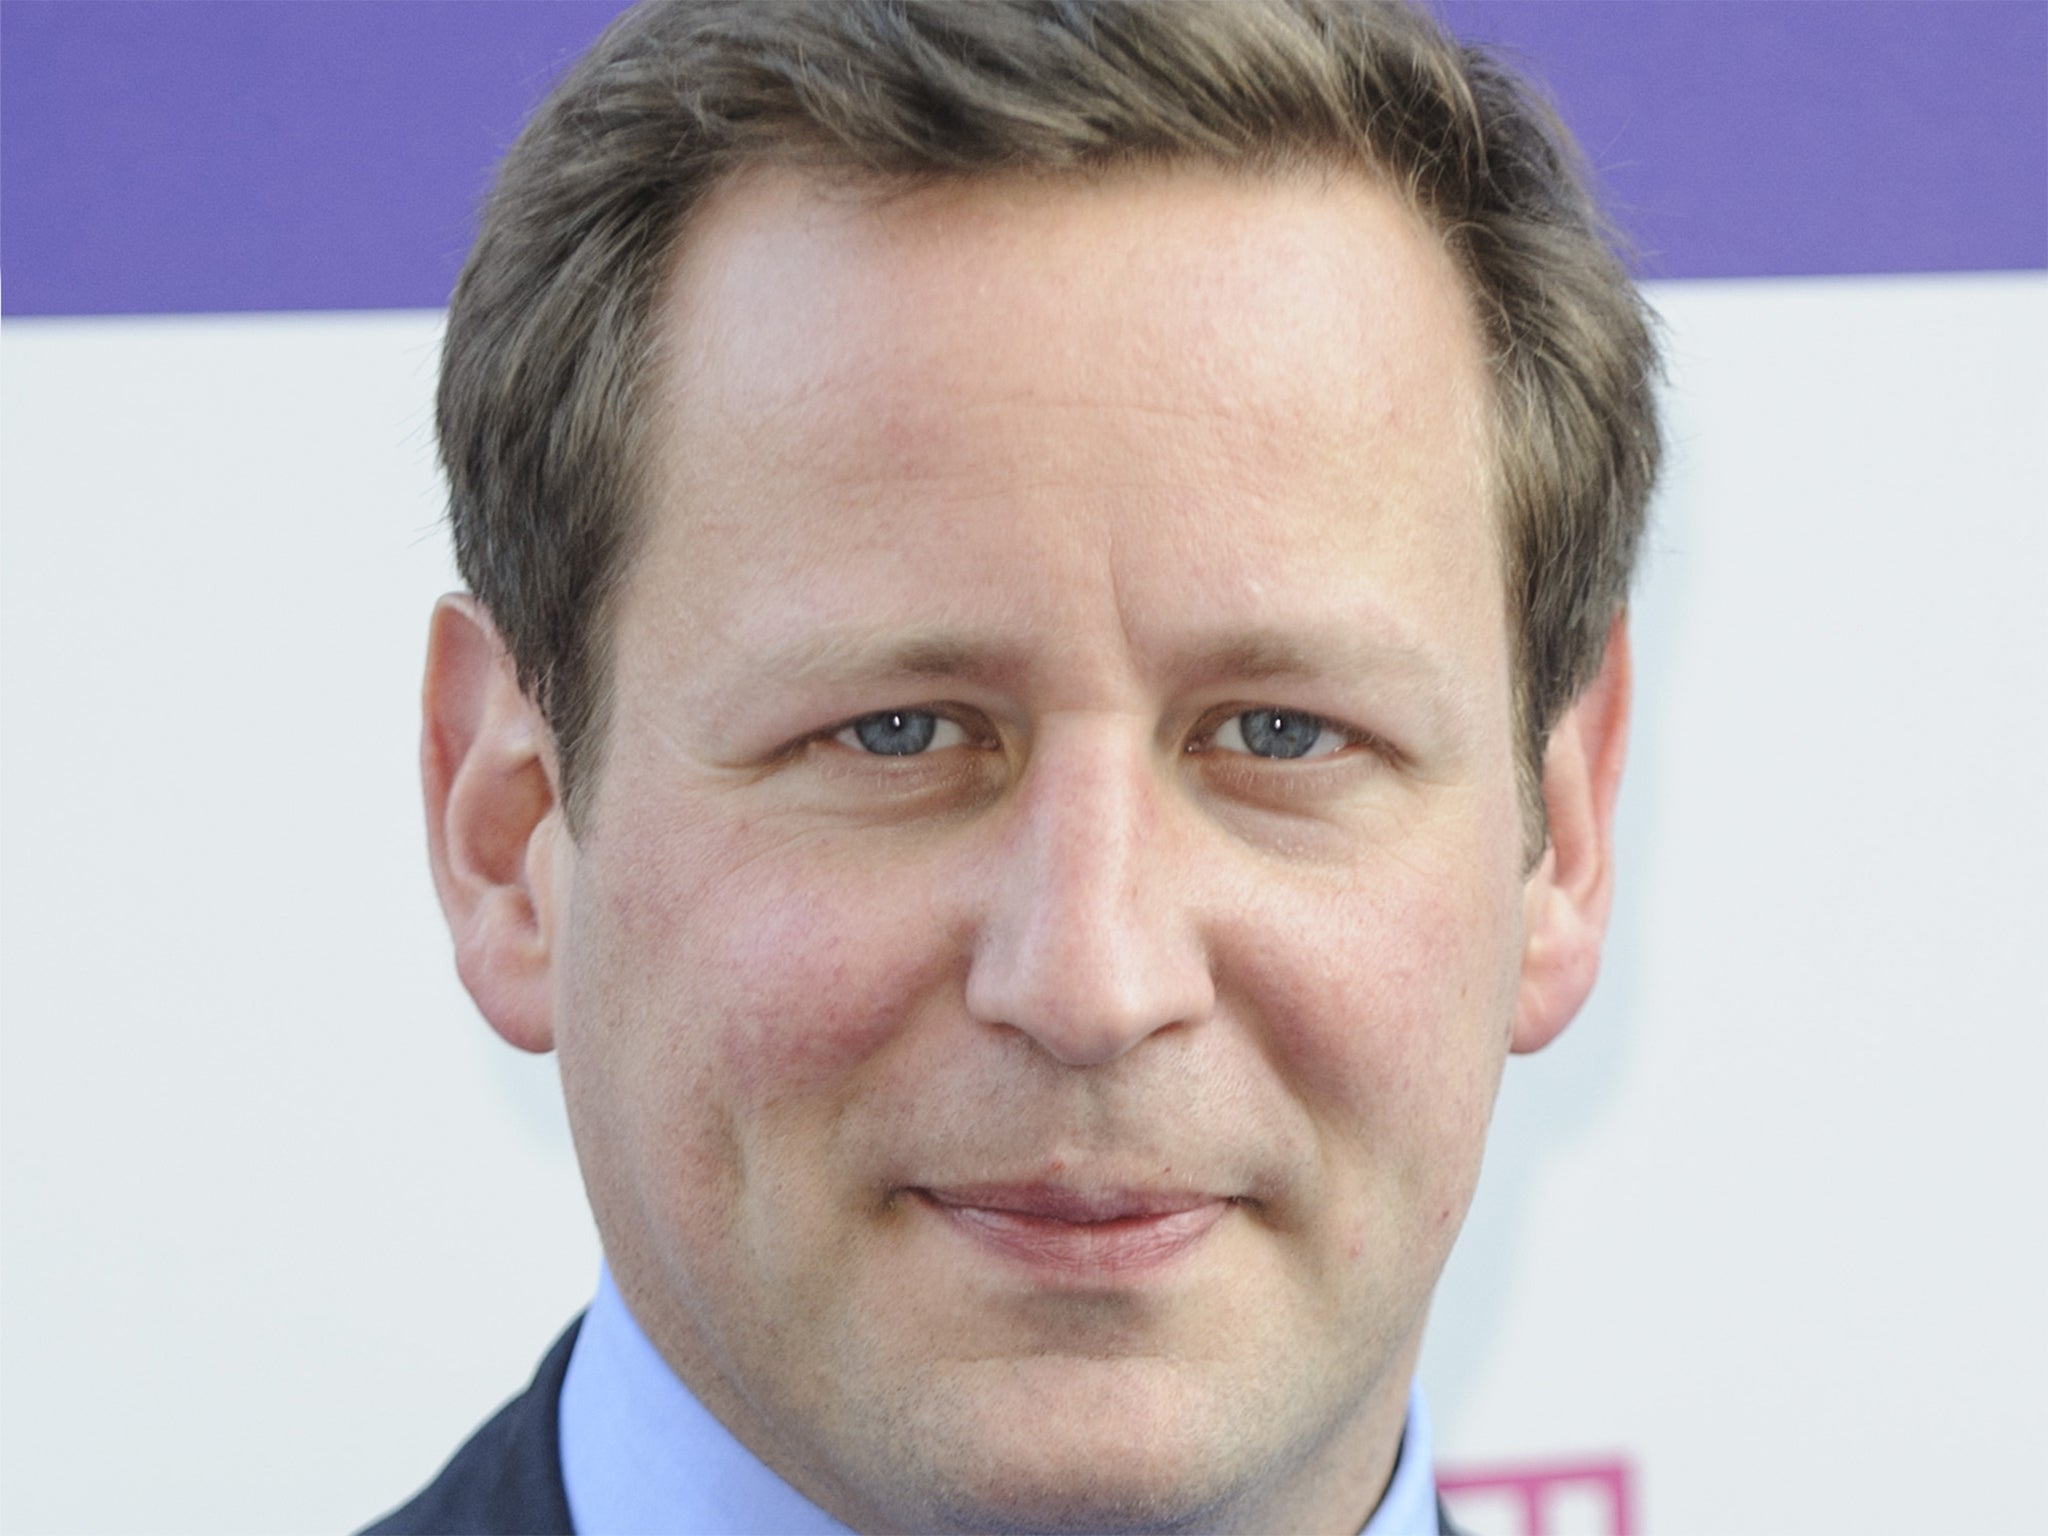 Ed Vaizey said broadcasters are cutting themselves off from a huge range of talent